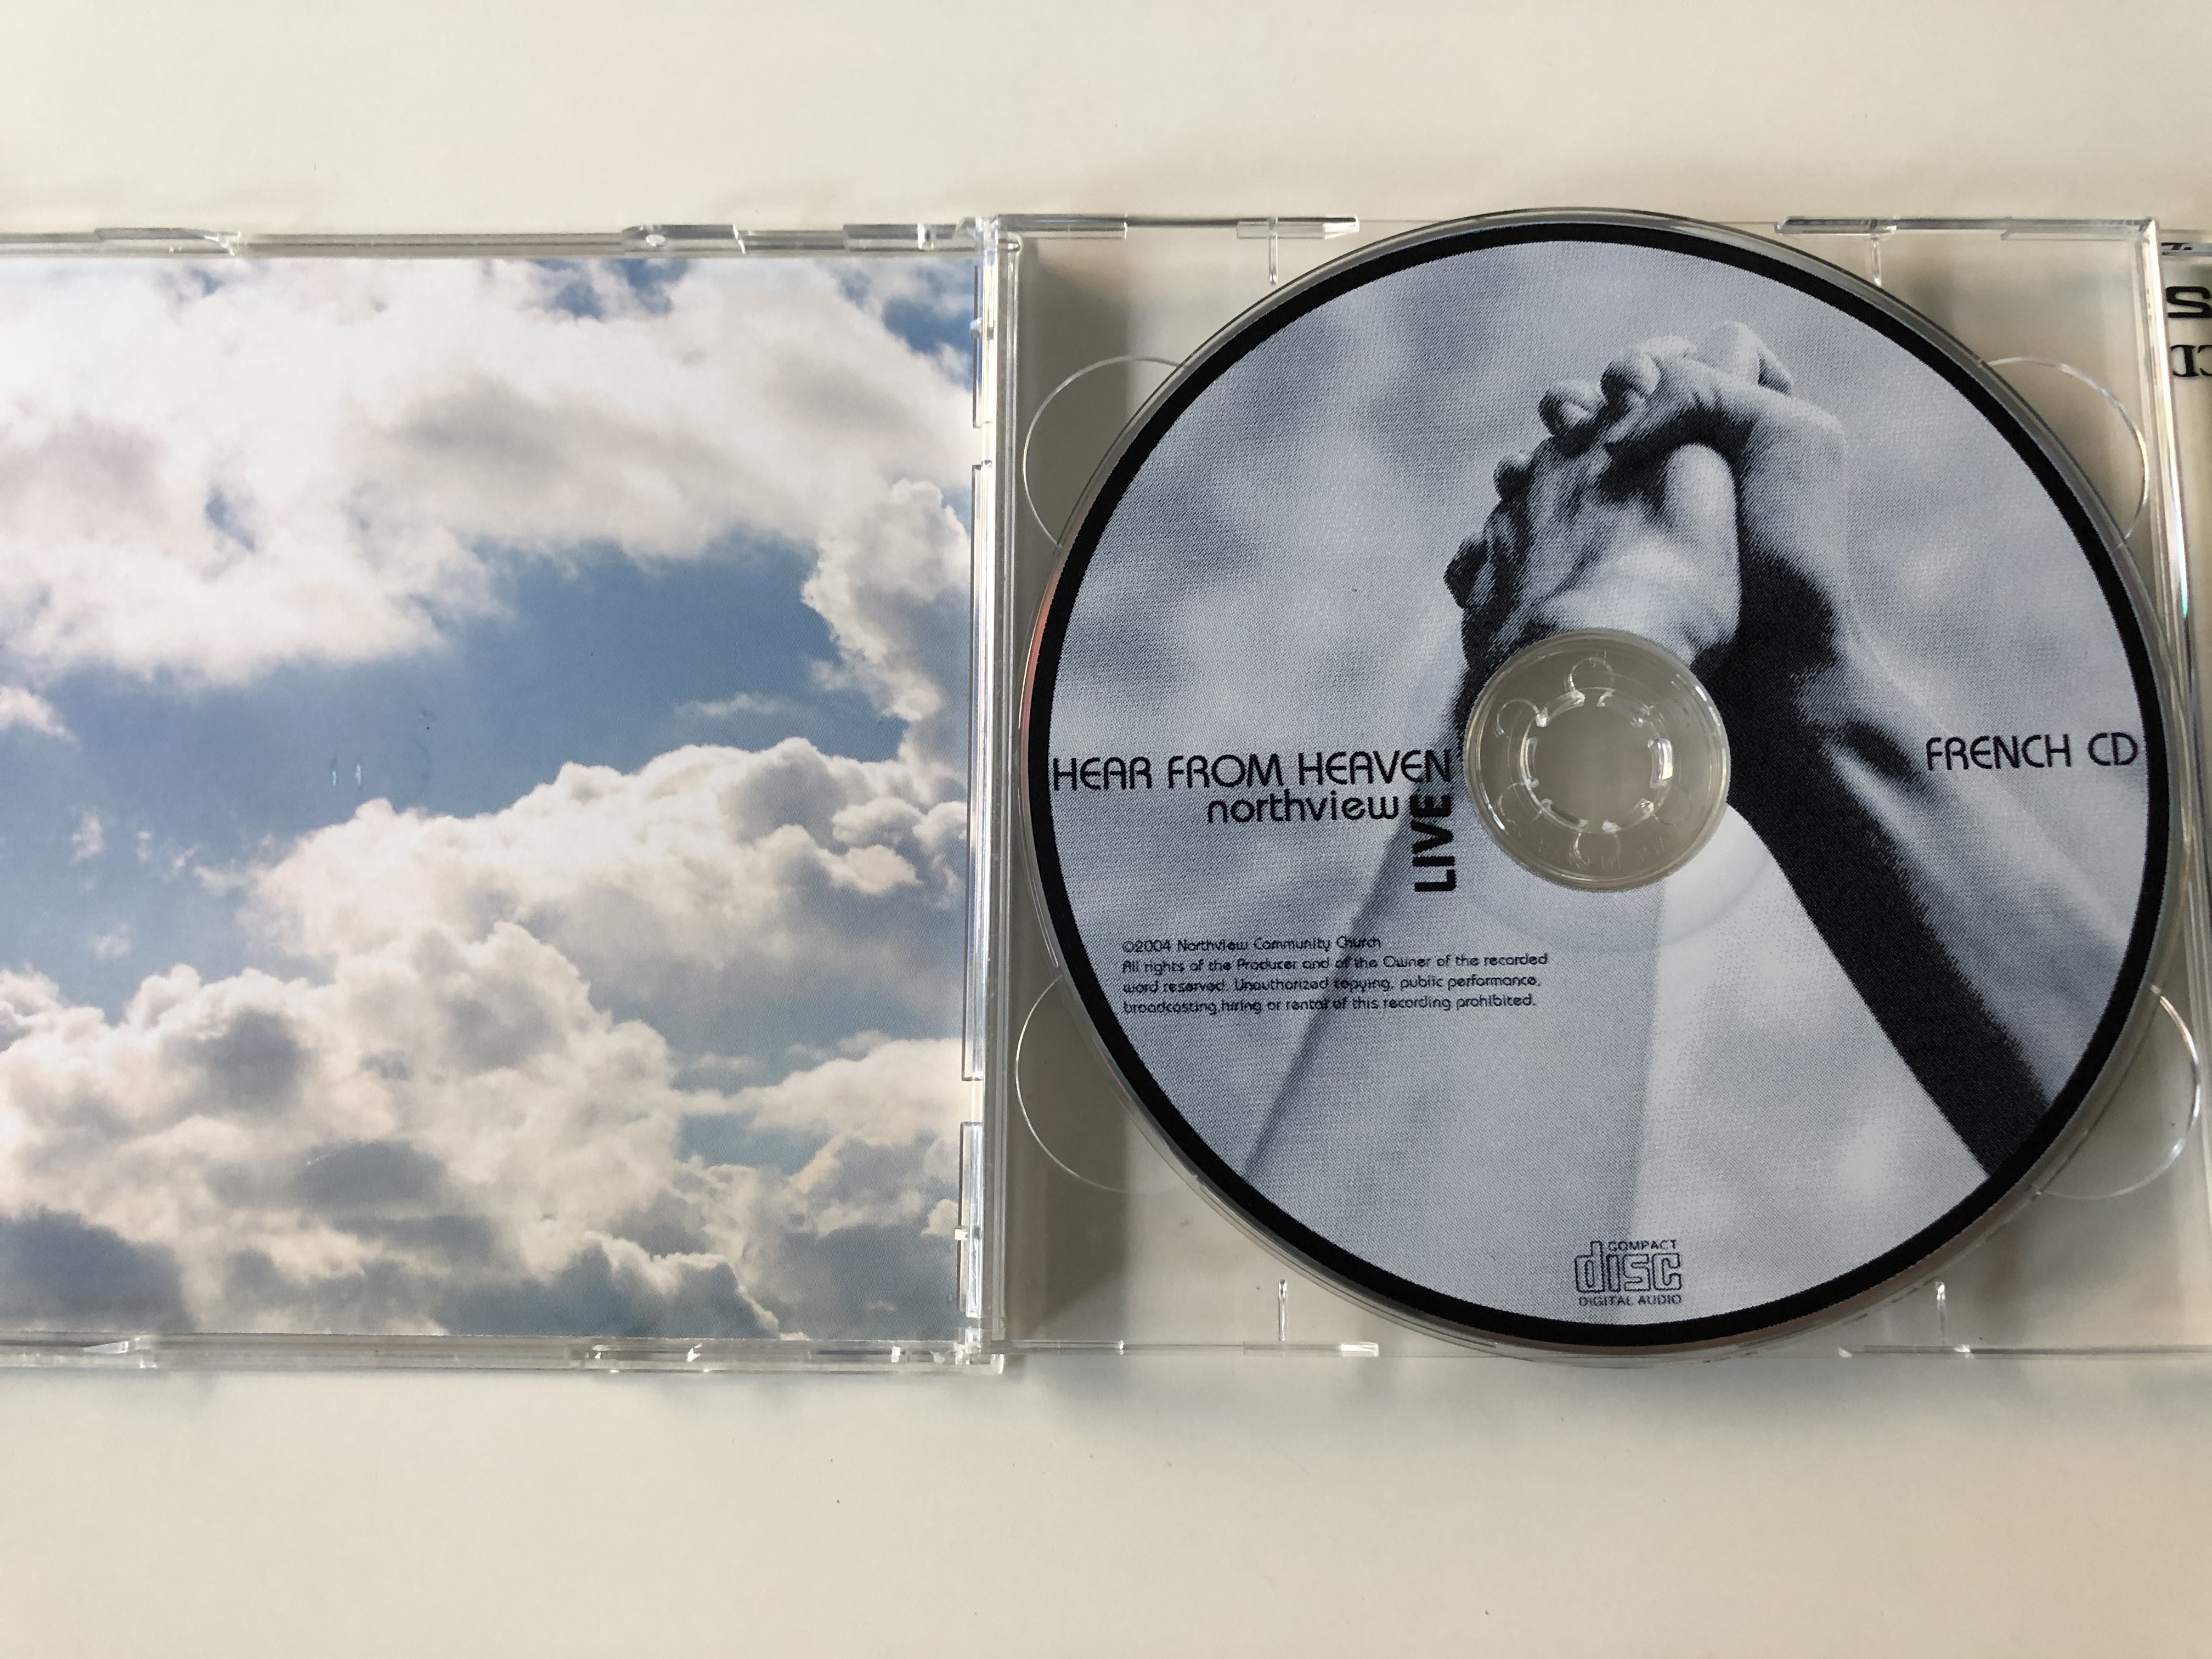 hear-from-heaven-northview-live-2004-worship-leaders-including-johnny-markin-suzanne-thiessen-chris-janz-kevin-boese-amy-klassen-stephanie-redicopp-and-others-northview-community-chu-8-.jpg